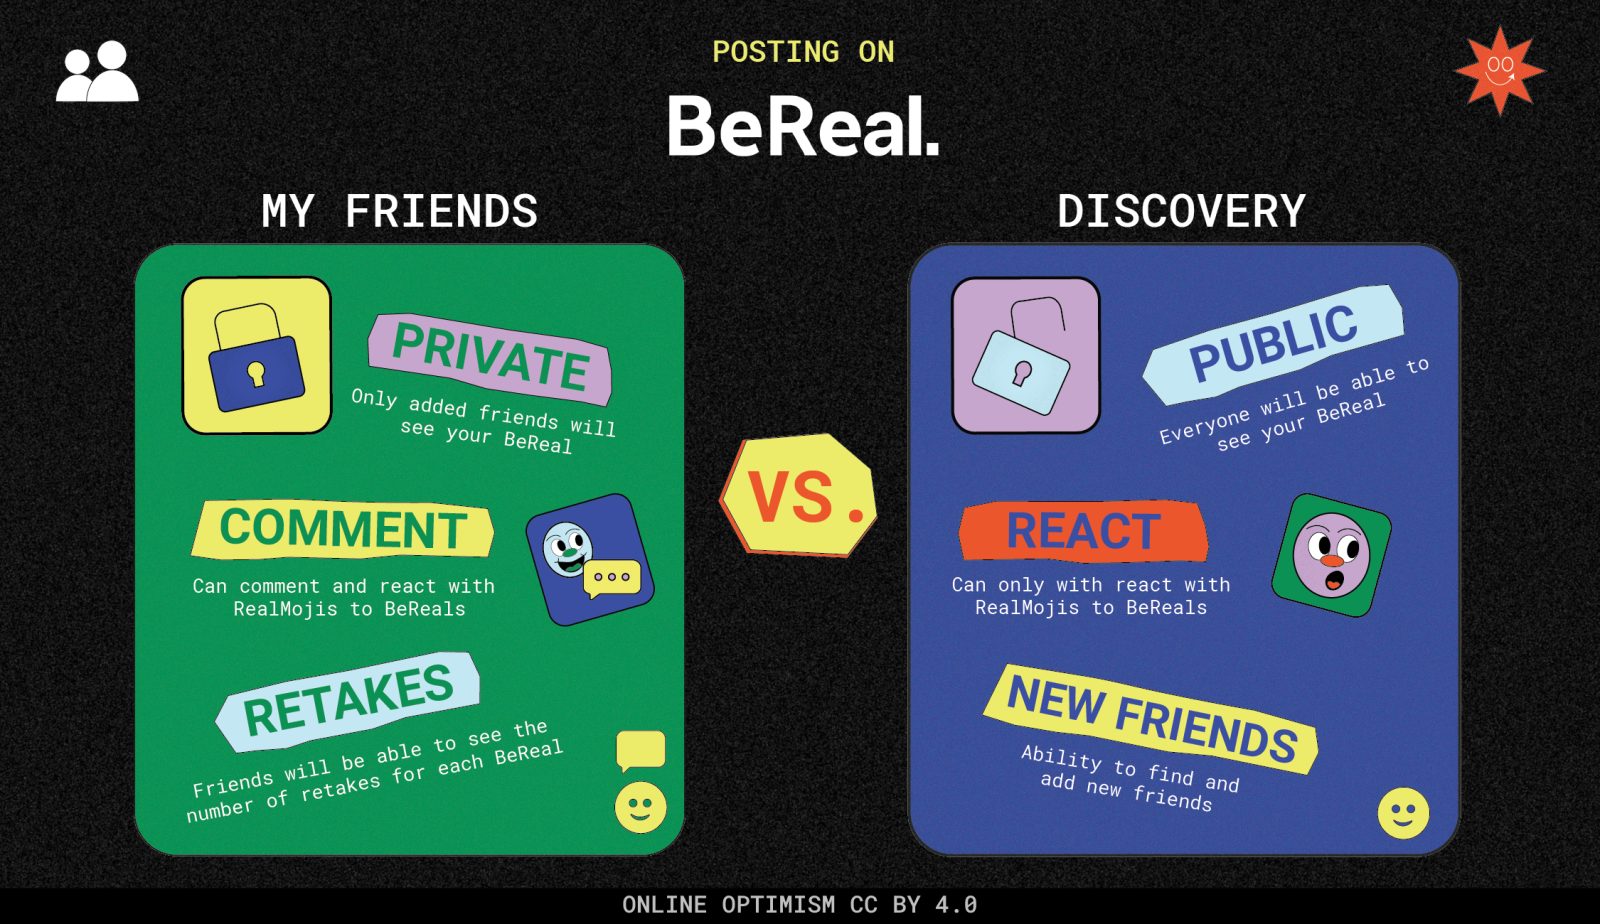 Posting on BeReal My Friends vs Discovery Graphic by Online Optimism